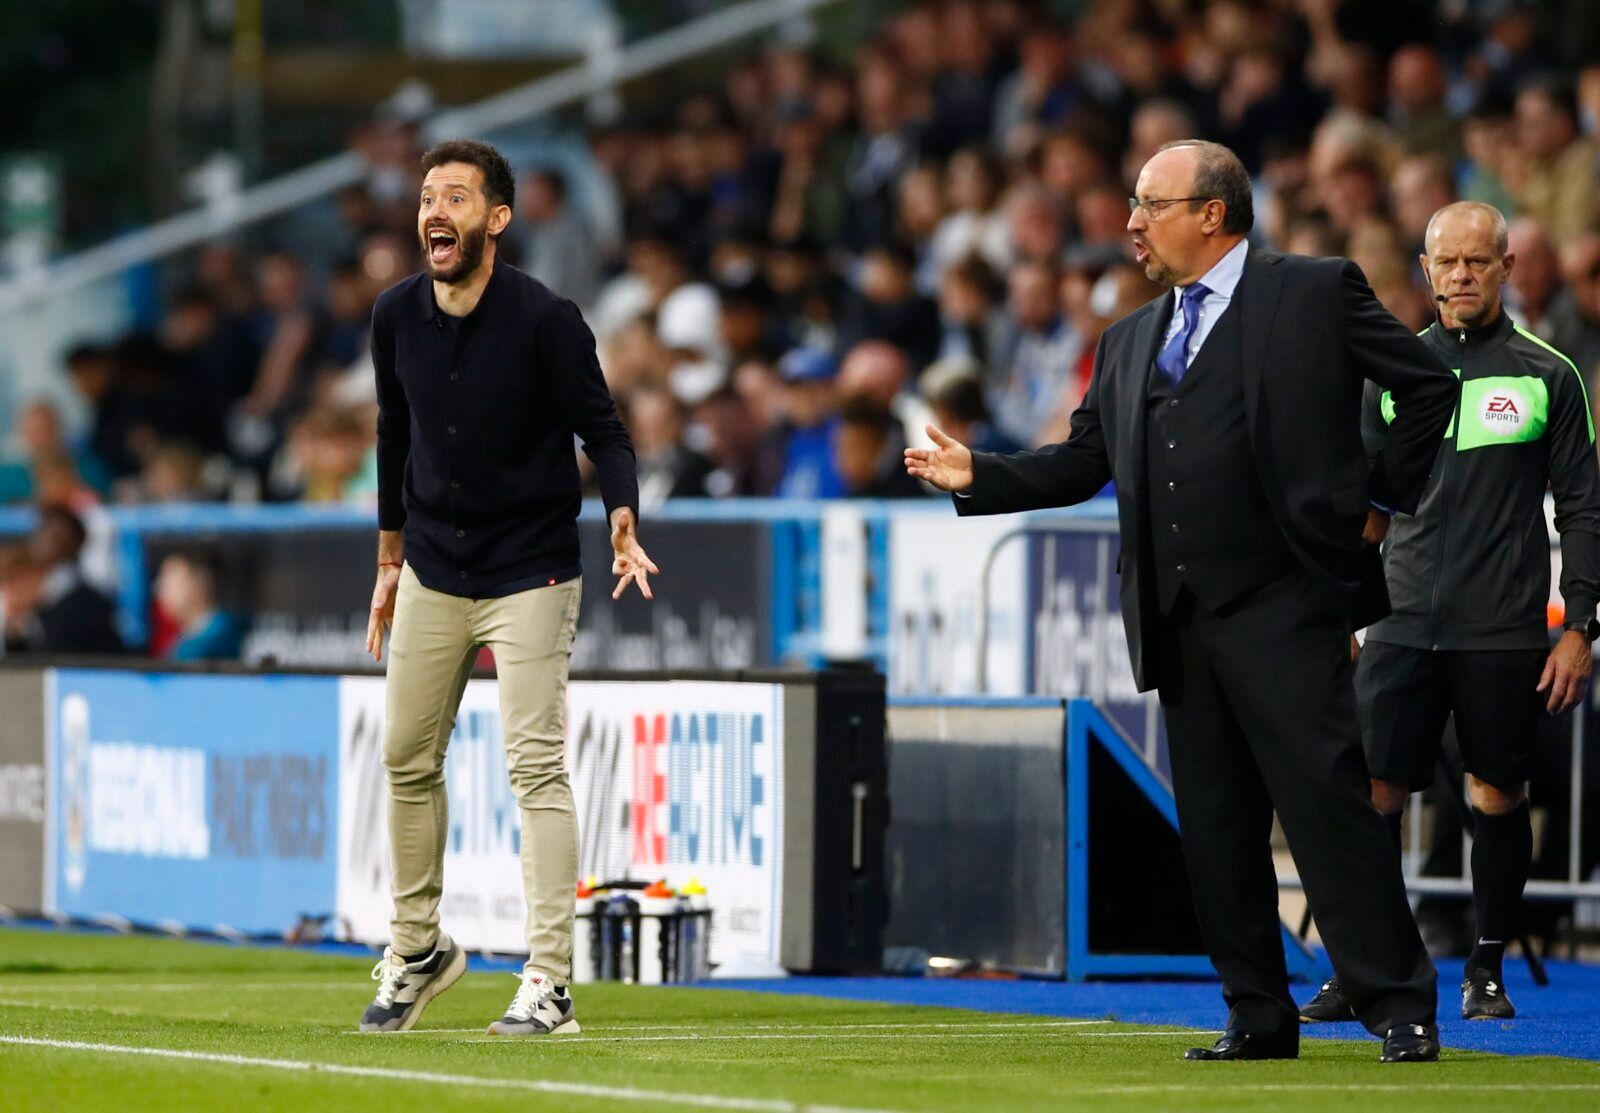 Soccer - England - Carabao Cup Second Round - Huddersfield Town v Everton - John Smith's Stadium, Huddersfield, Britain - August 24, 2021 Everton manager Rafael Benitez and Huddersfield Town manager Carlos Corberan react during the match Action Images via Reuters/Jason Cairnduff